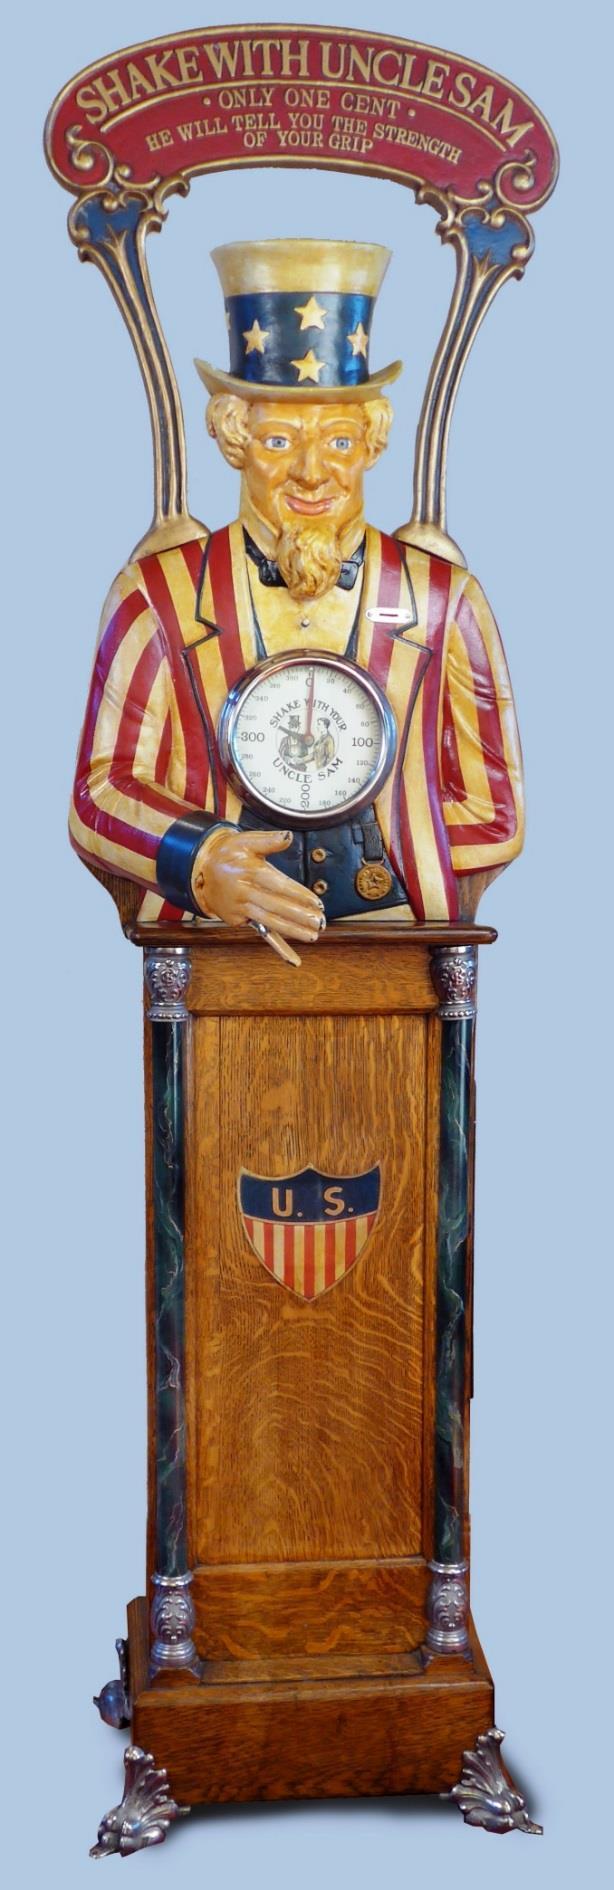 In this case, the Caille version adds a fancy top-sign promoting: Shake With Uncle Sam; Only One Cent; He Will Tell You the Strength of Your Grip.